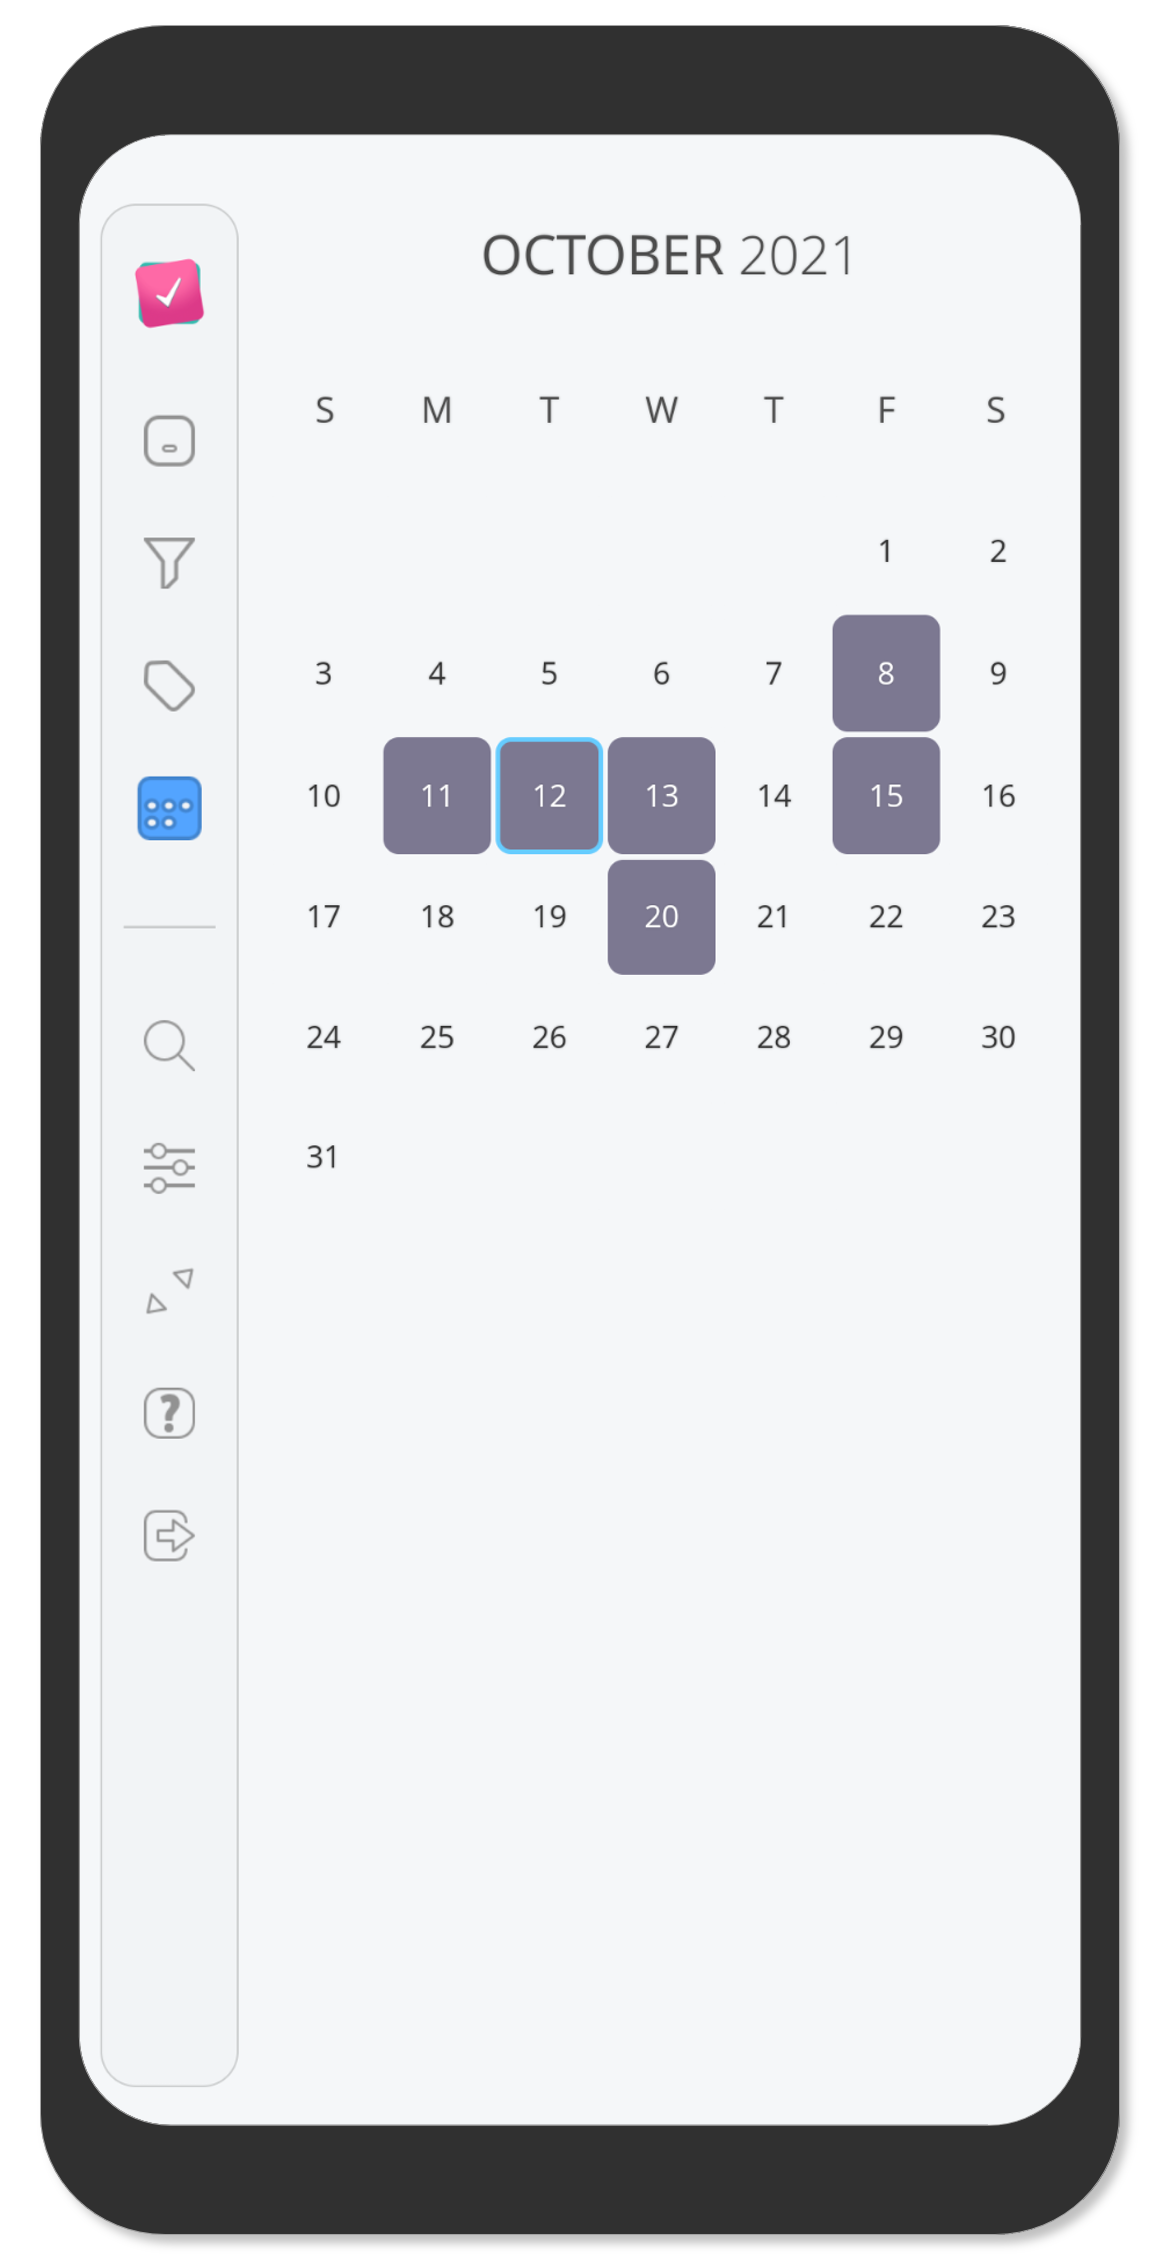 Use the Calendar view to see how many tasks are due on each day of the month